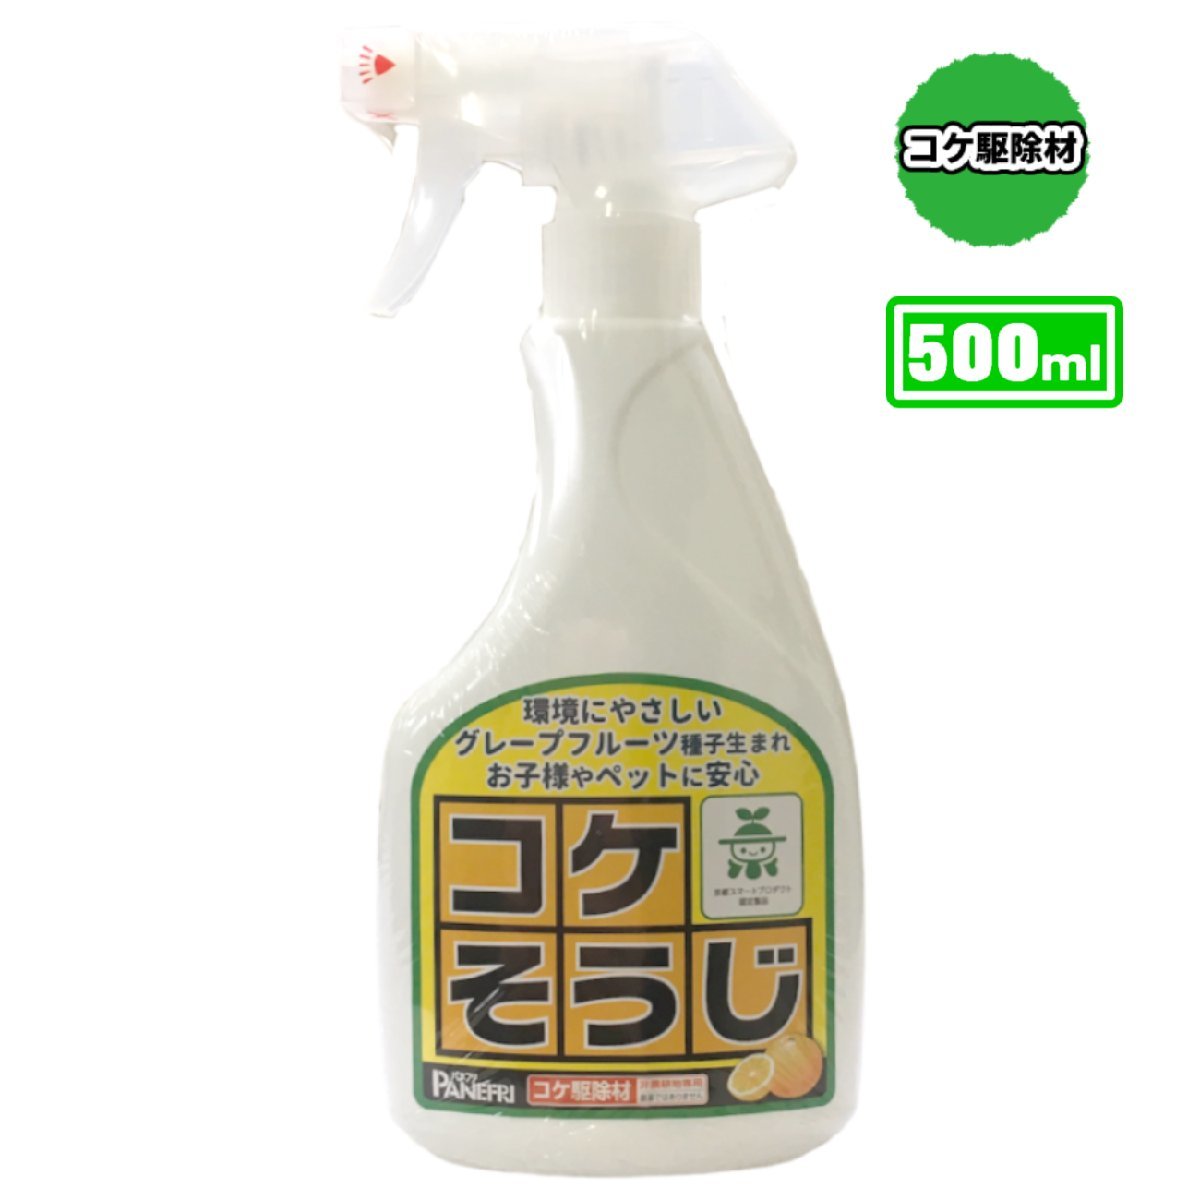  pesticide ingredient un- use moss cleaning spray koke seems to be . spray 500ml panel fli industry 